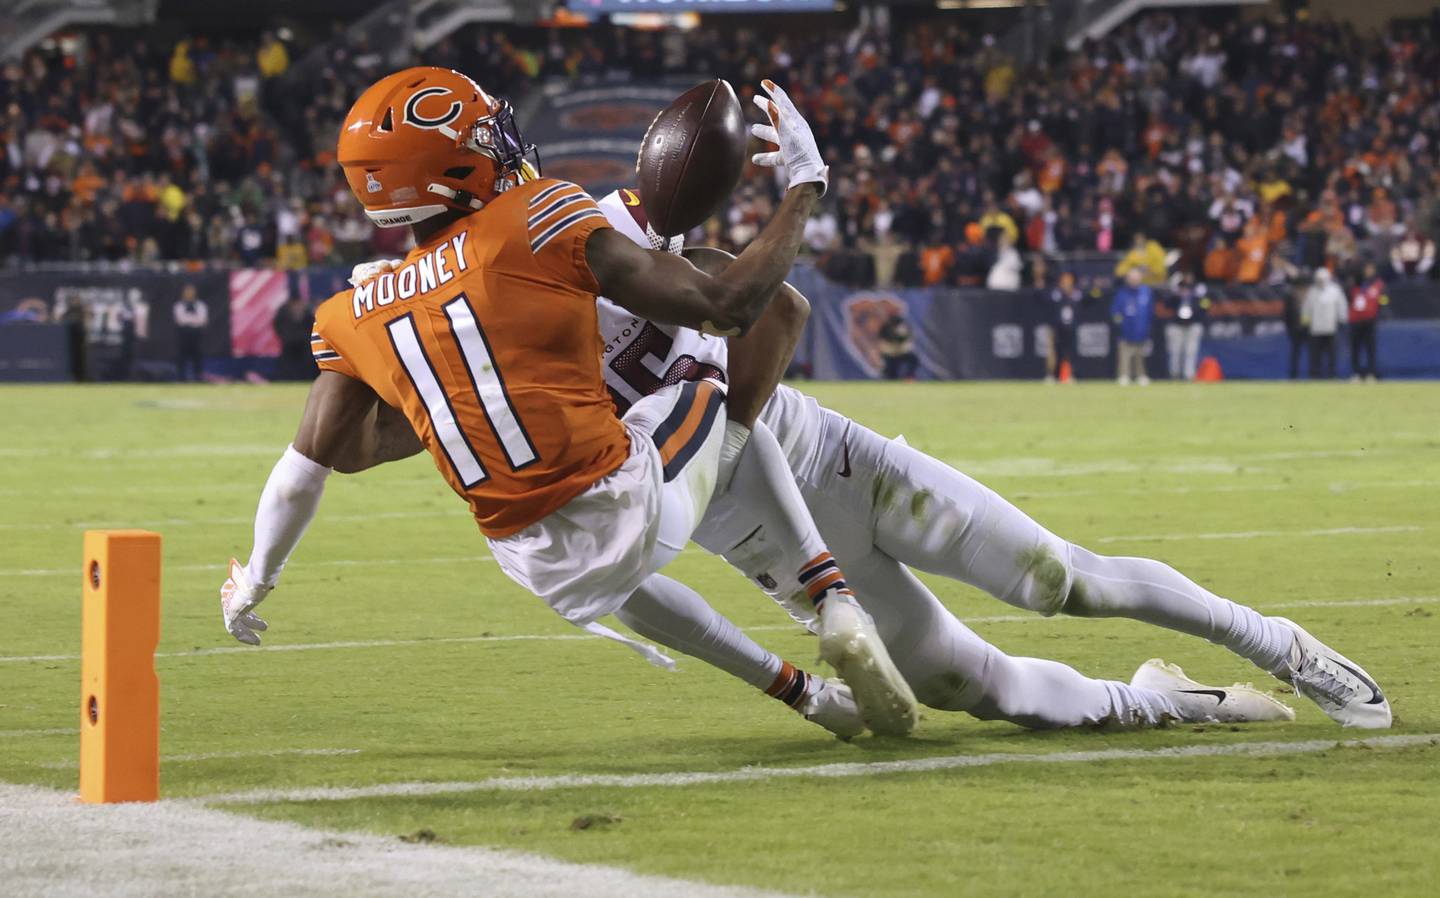 Bears wide receiver Darnell Mooney reaches for the ball as Commanders cornerback Benjamin St-Juste defends at the goal line in the final seconds at Soldier Field on Oct. 13, 2022.